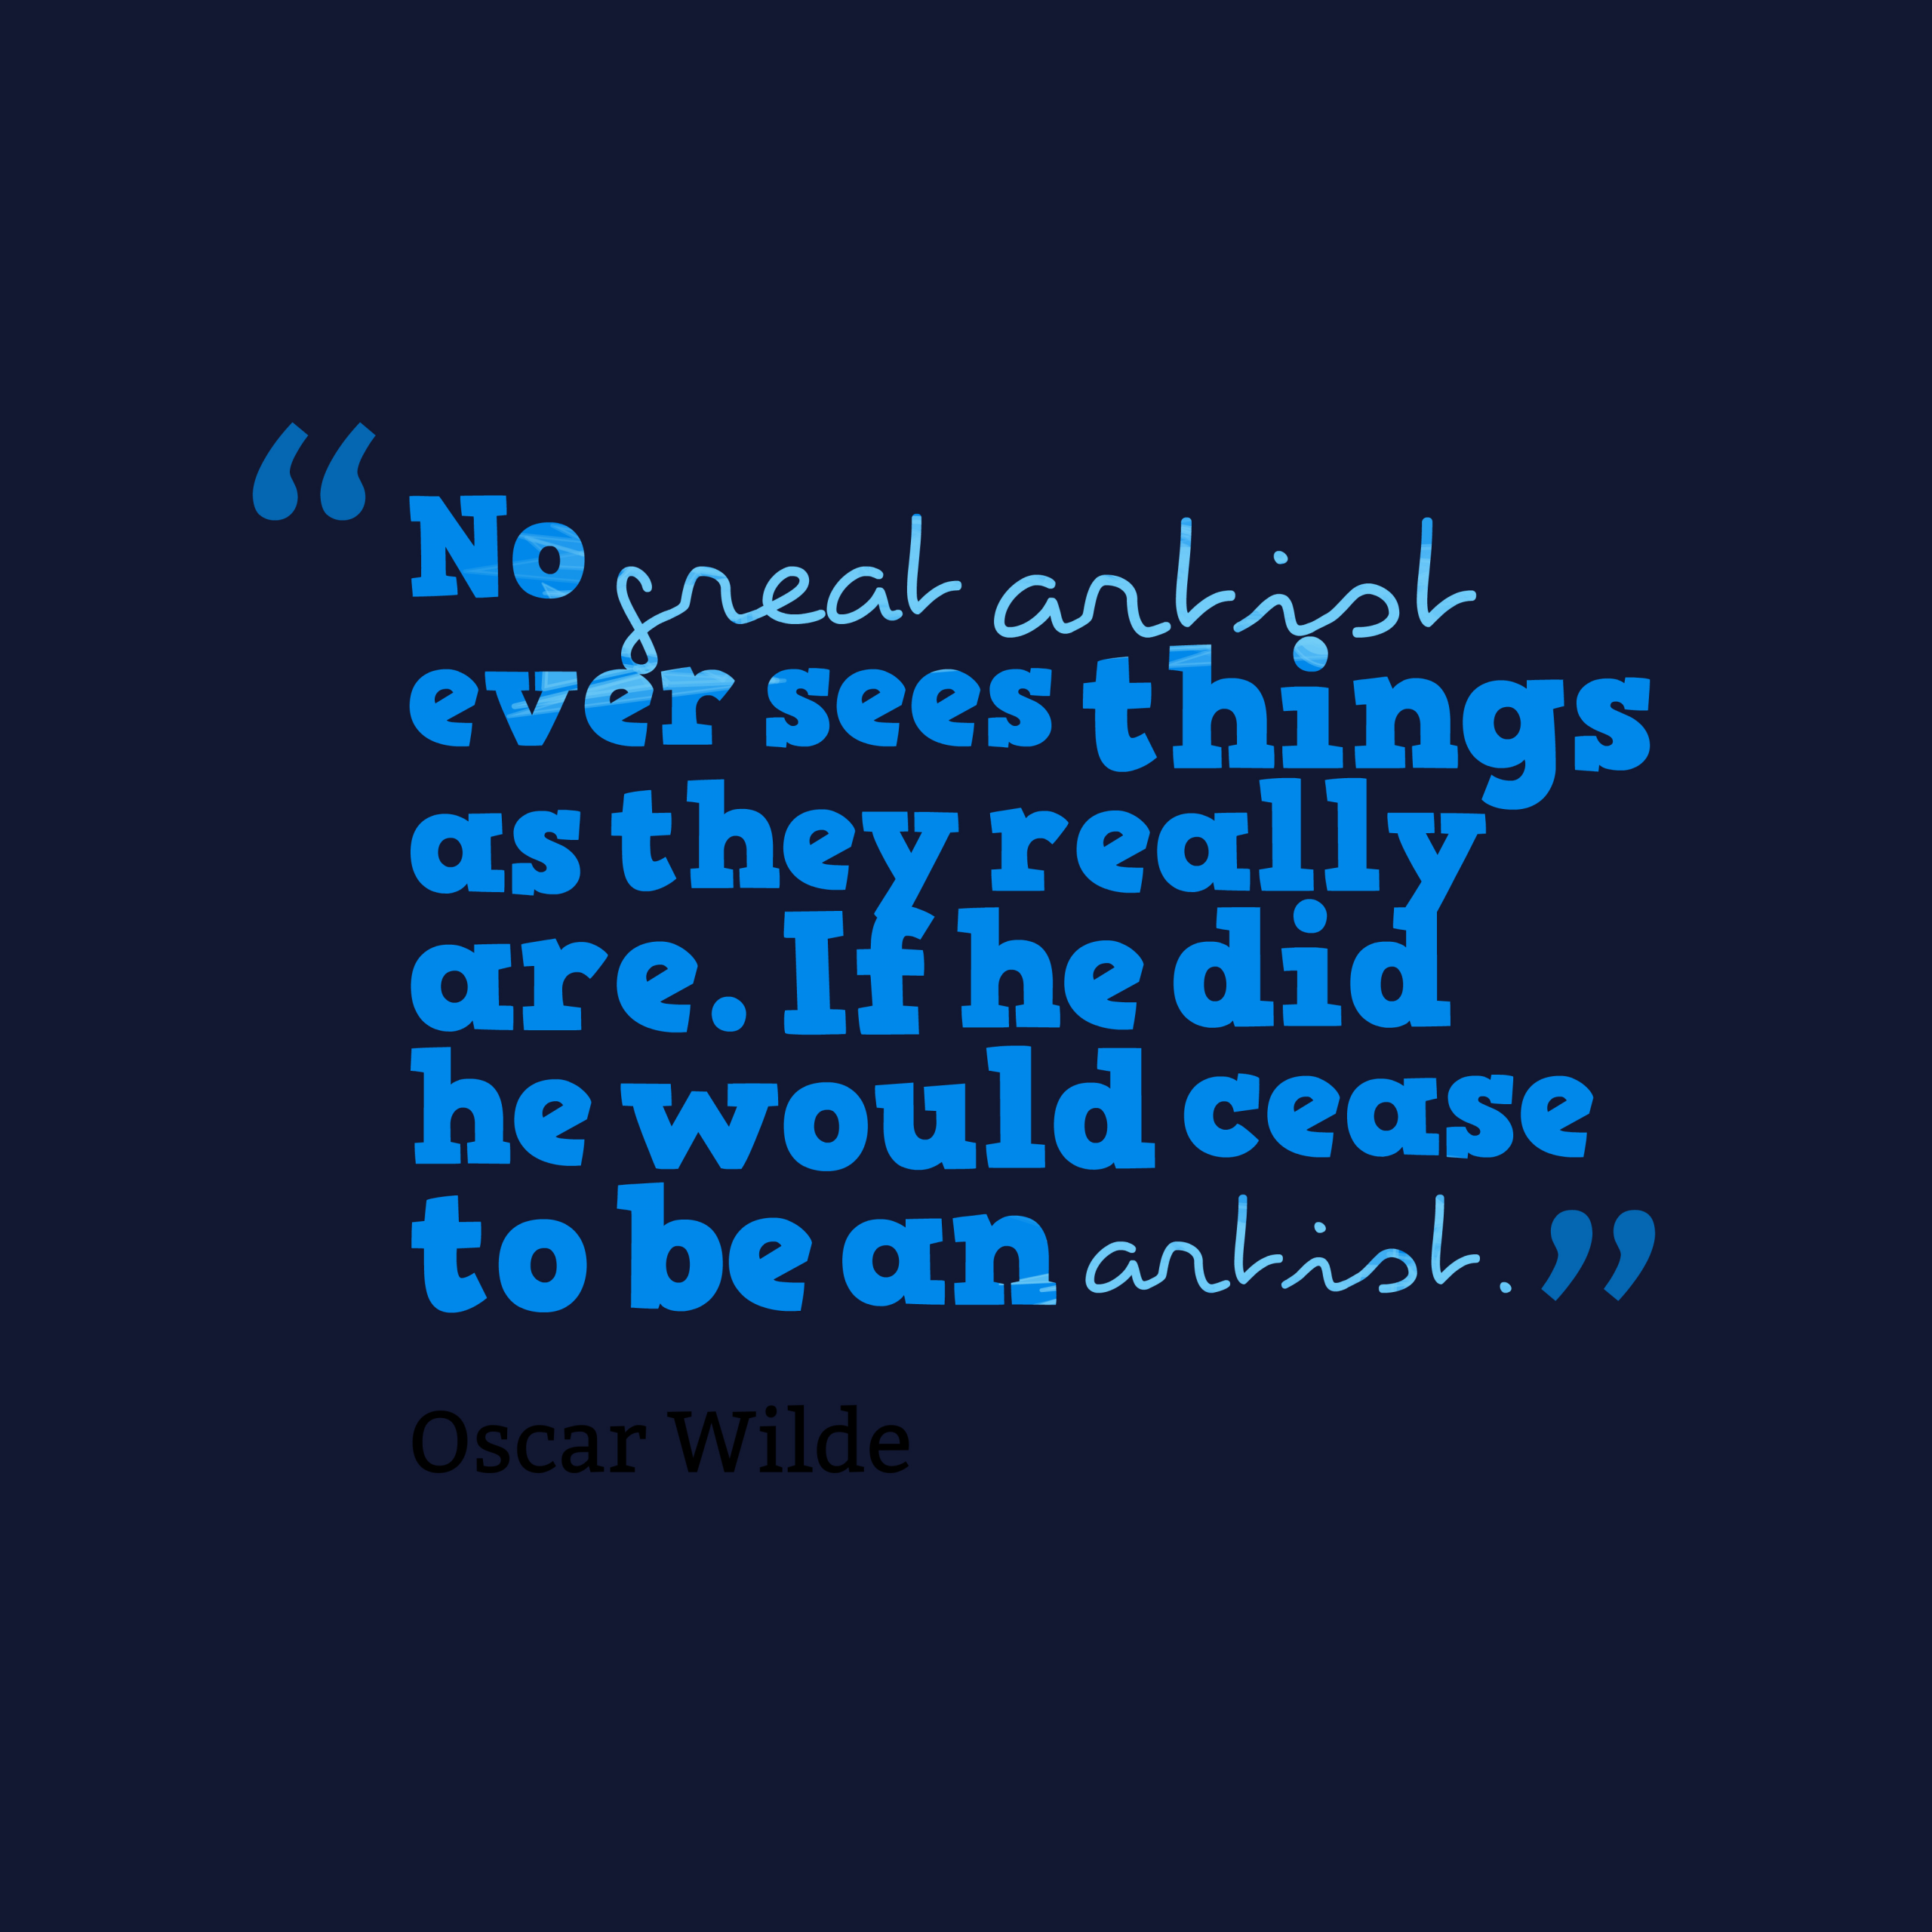 Oscar Wilde Quotes About Life
 187 Best Oscar Wilde Quotes